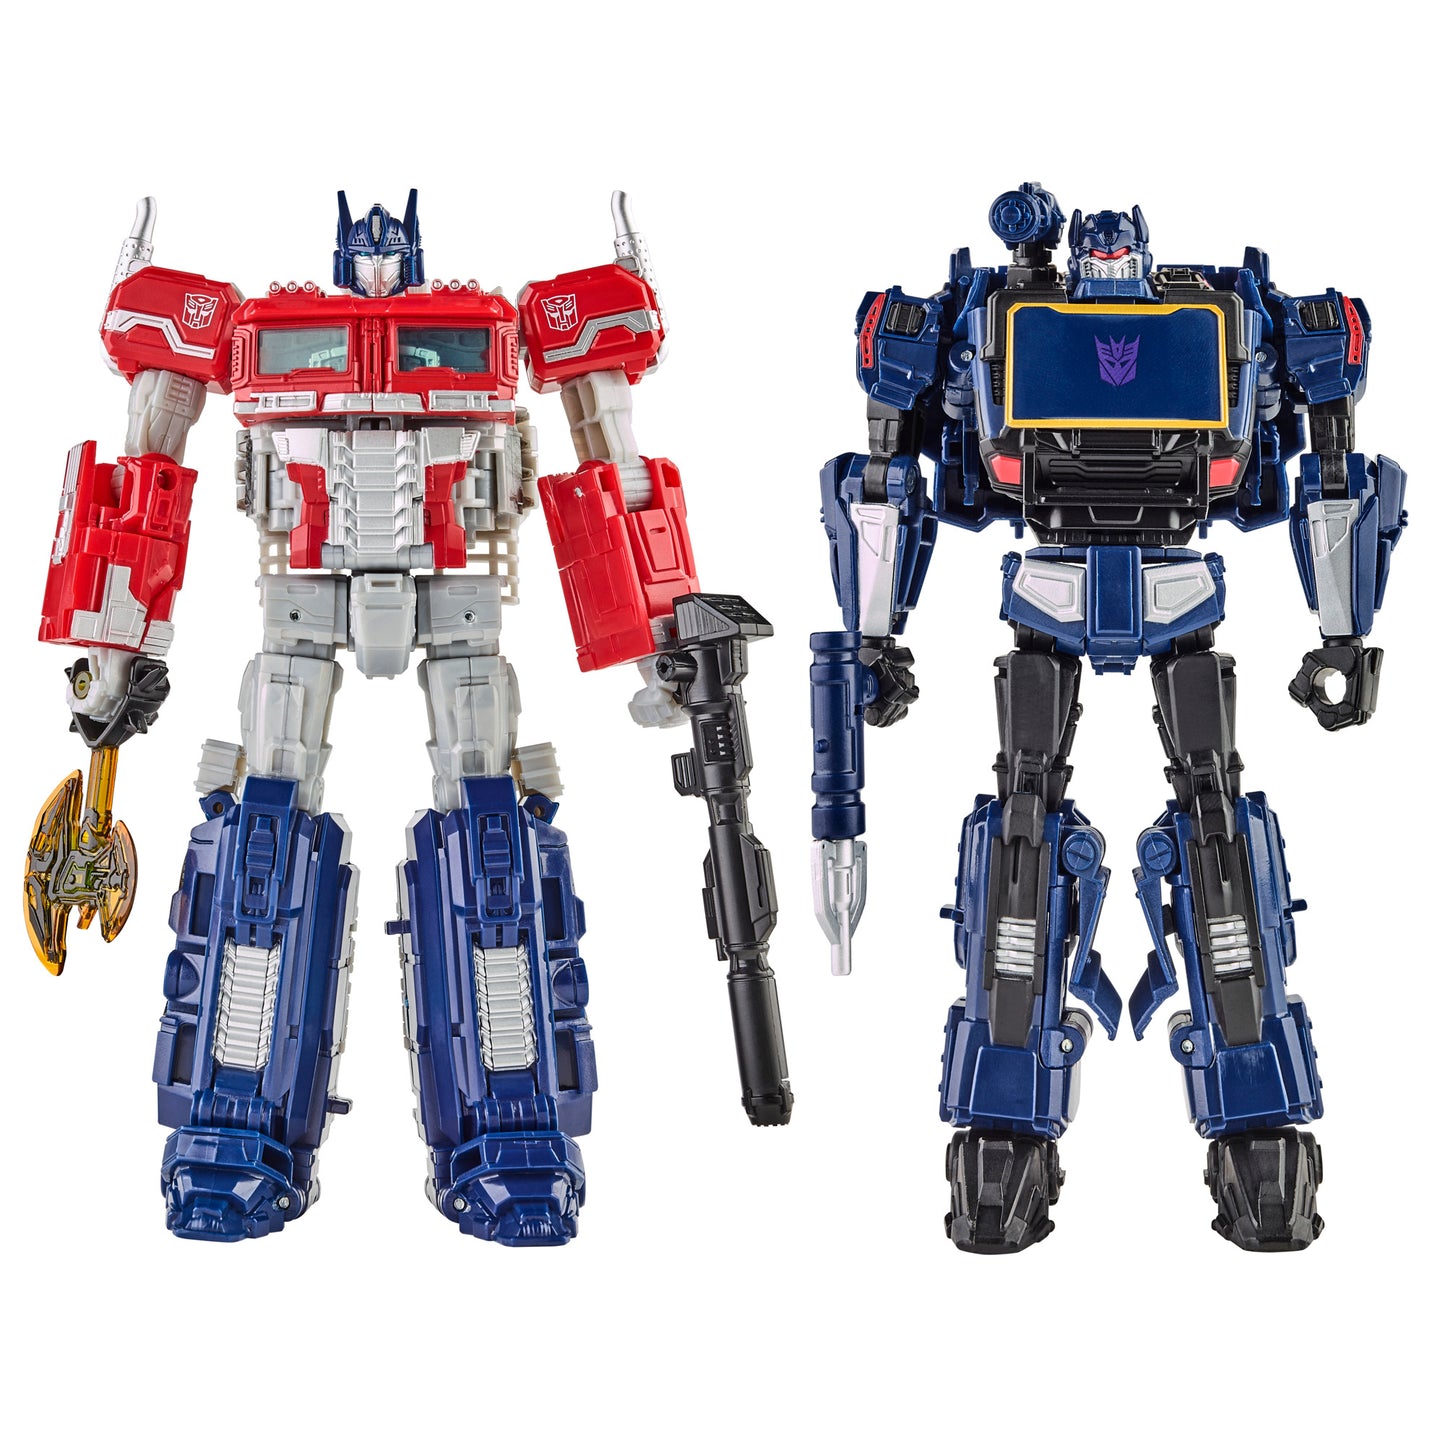 Transformers: Reactivate Video Game-Inspired Optimus Prime and Soundwave Action Figures - HERETOSERVEYOU